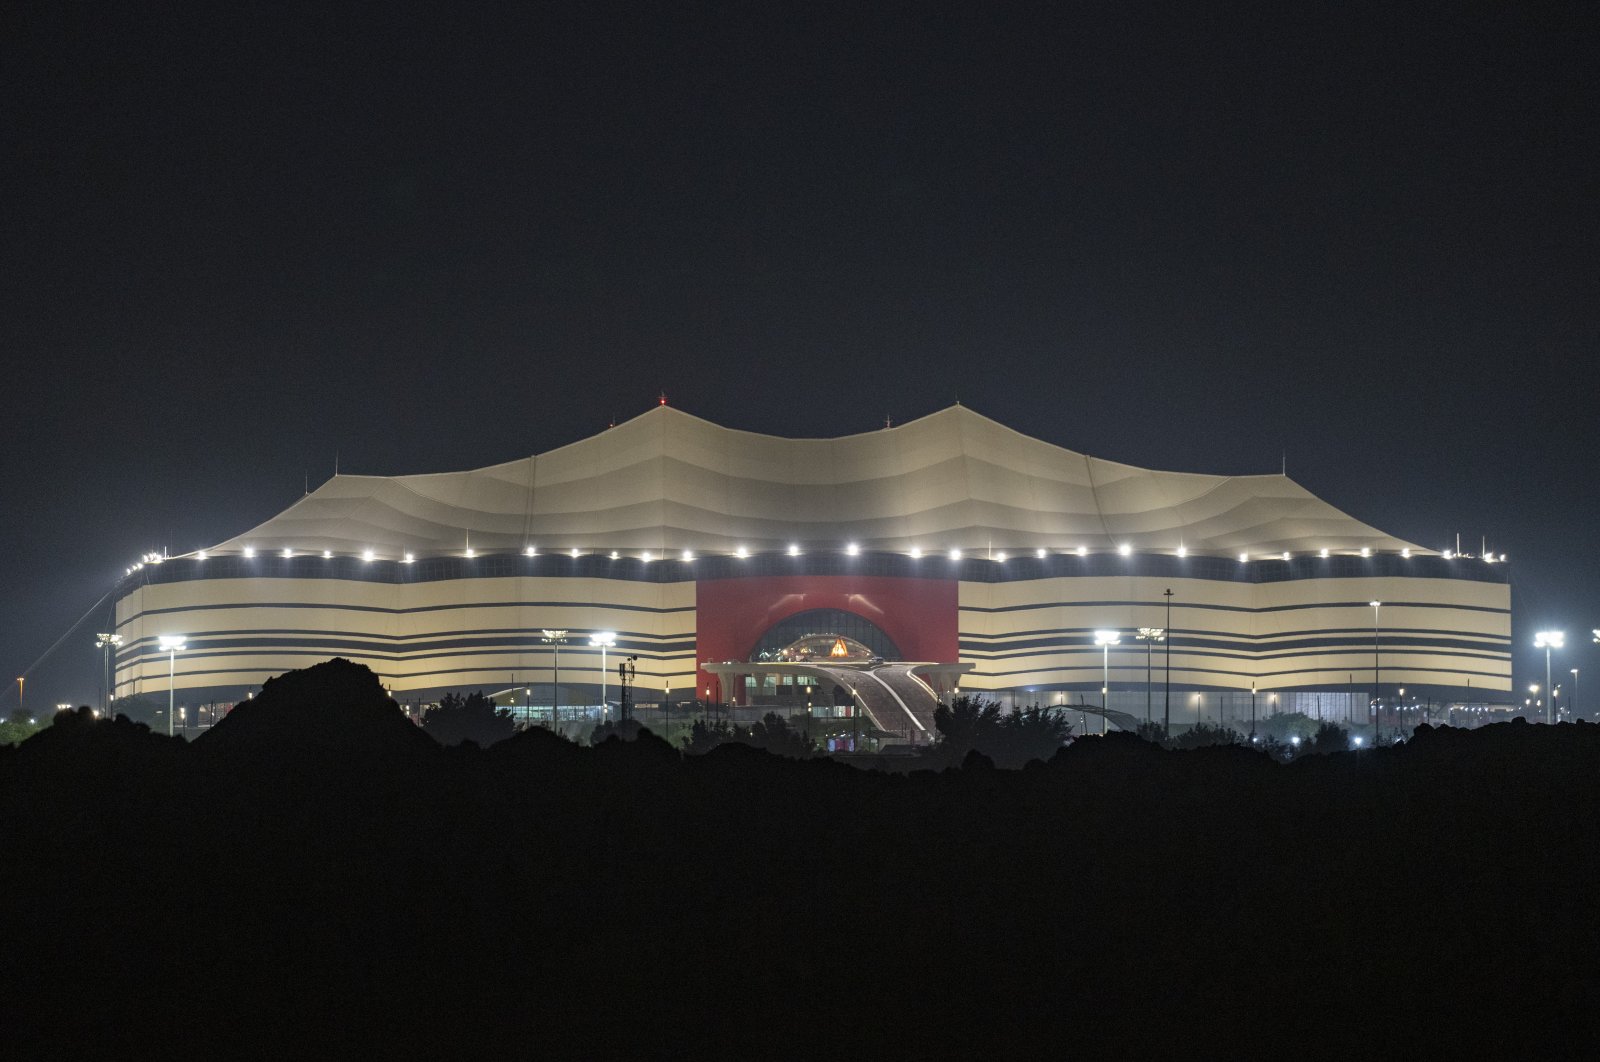 A general view of the World Cup venue Al Bayt Stadium, which was inspired by the traditional Bedouin tents, Al Khor, Qatar, Dec. 6, 2021. (AP Photo)